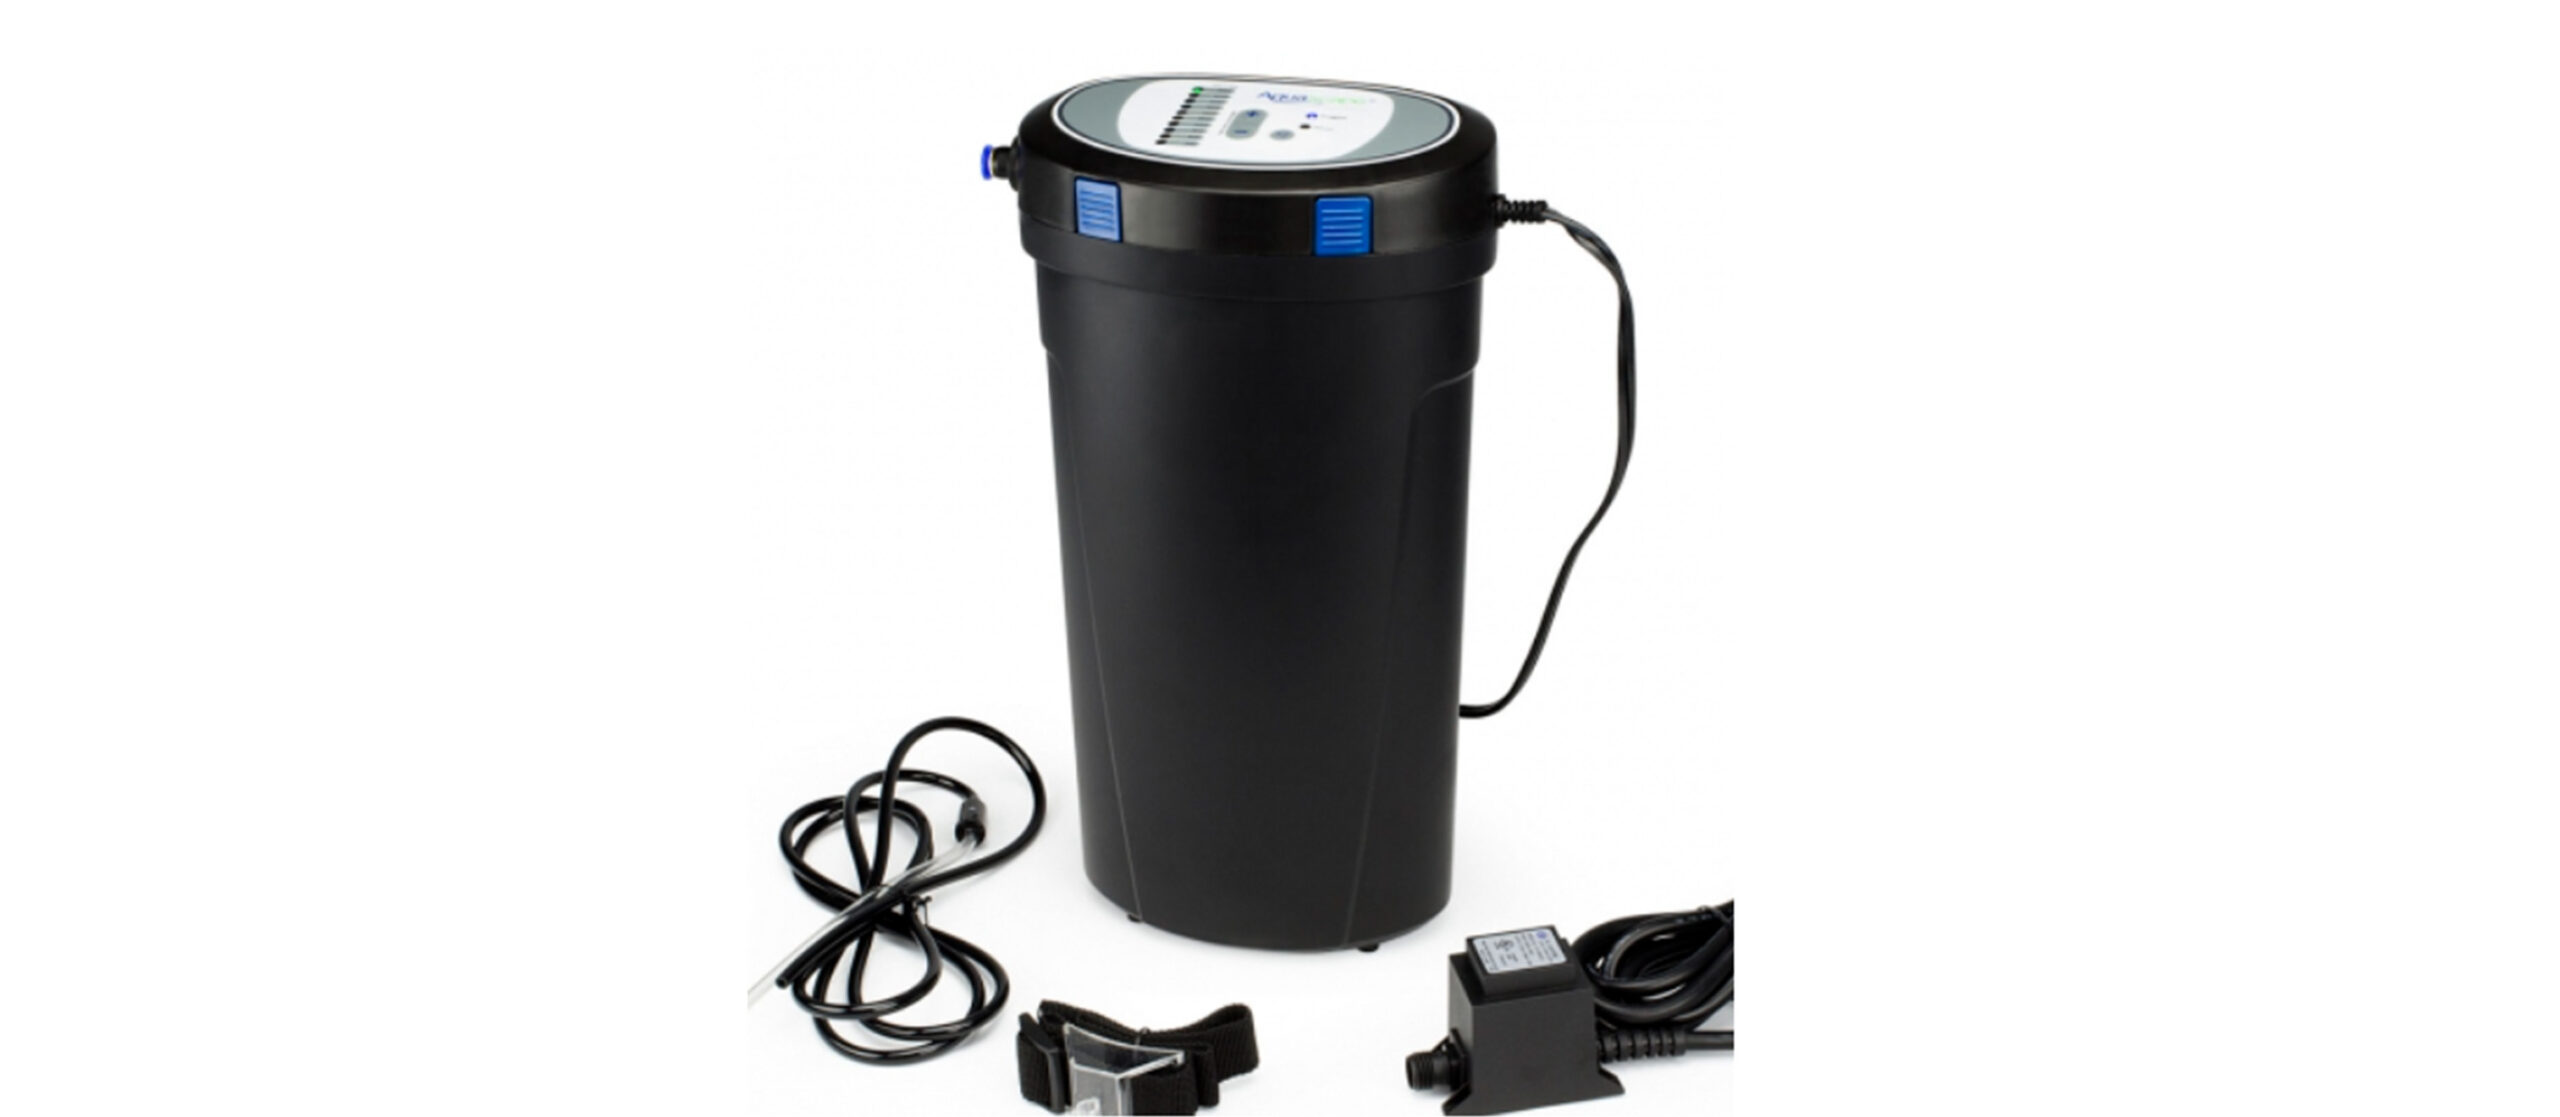 Aquascape Automatic Doser System, electronically-operated dispenser that accurately and consistently adds your choice of specially-formulated water treatments to your water.